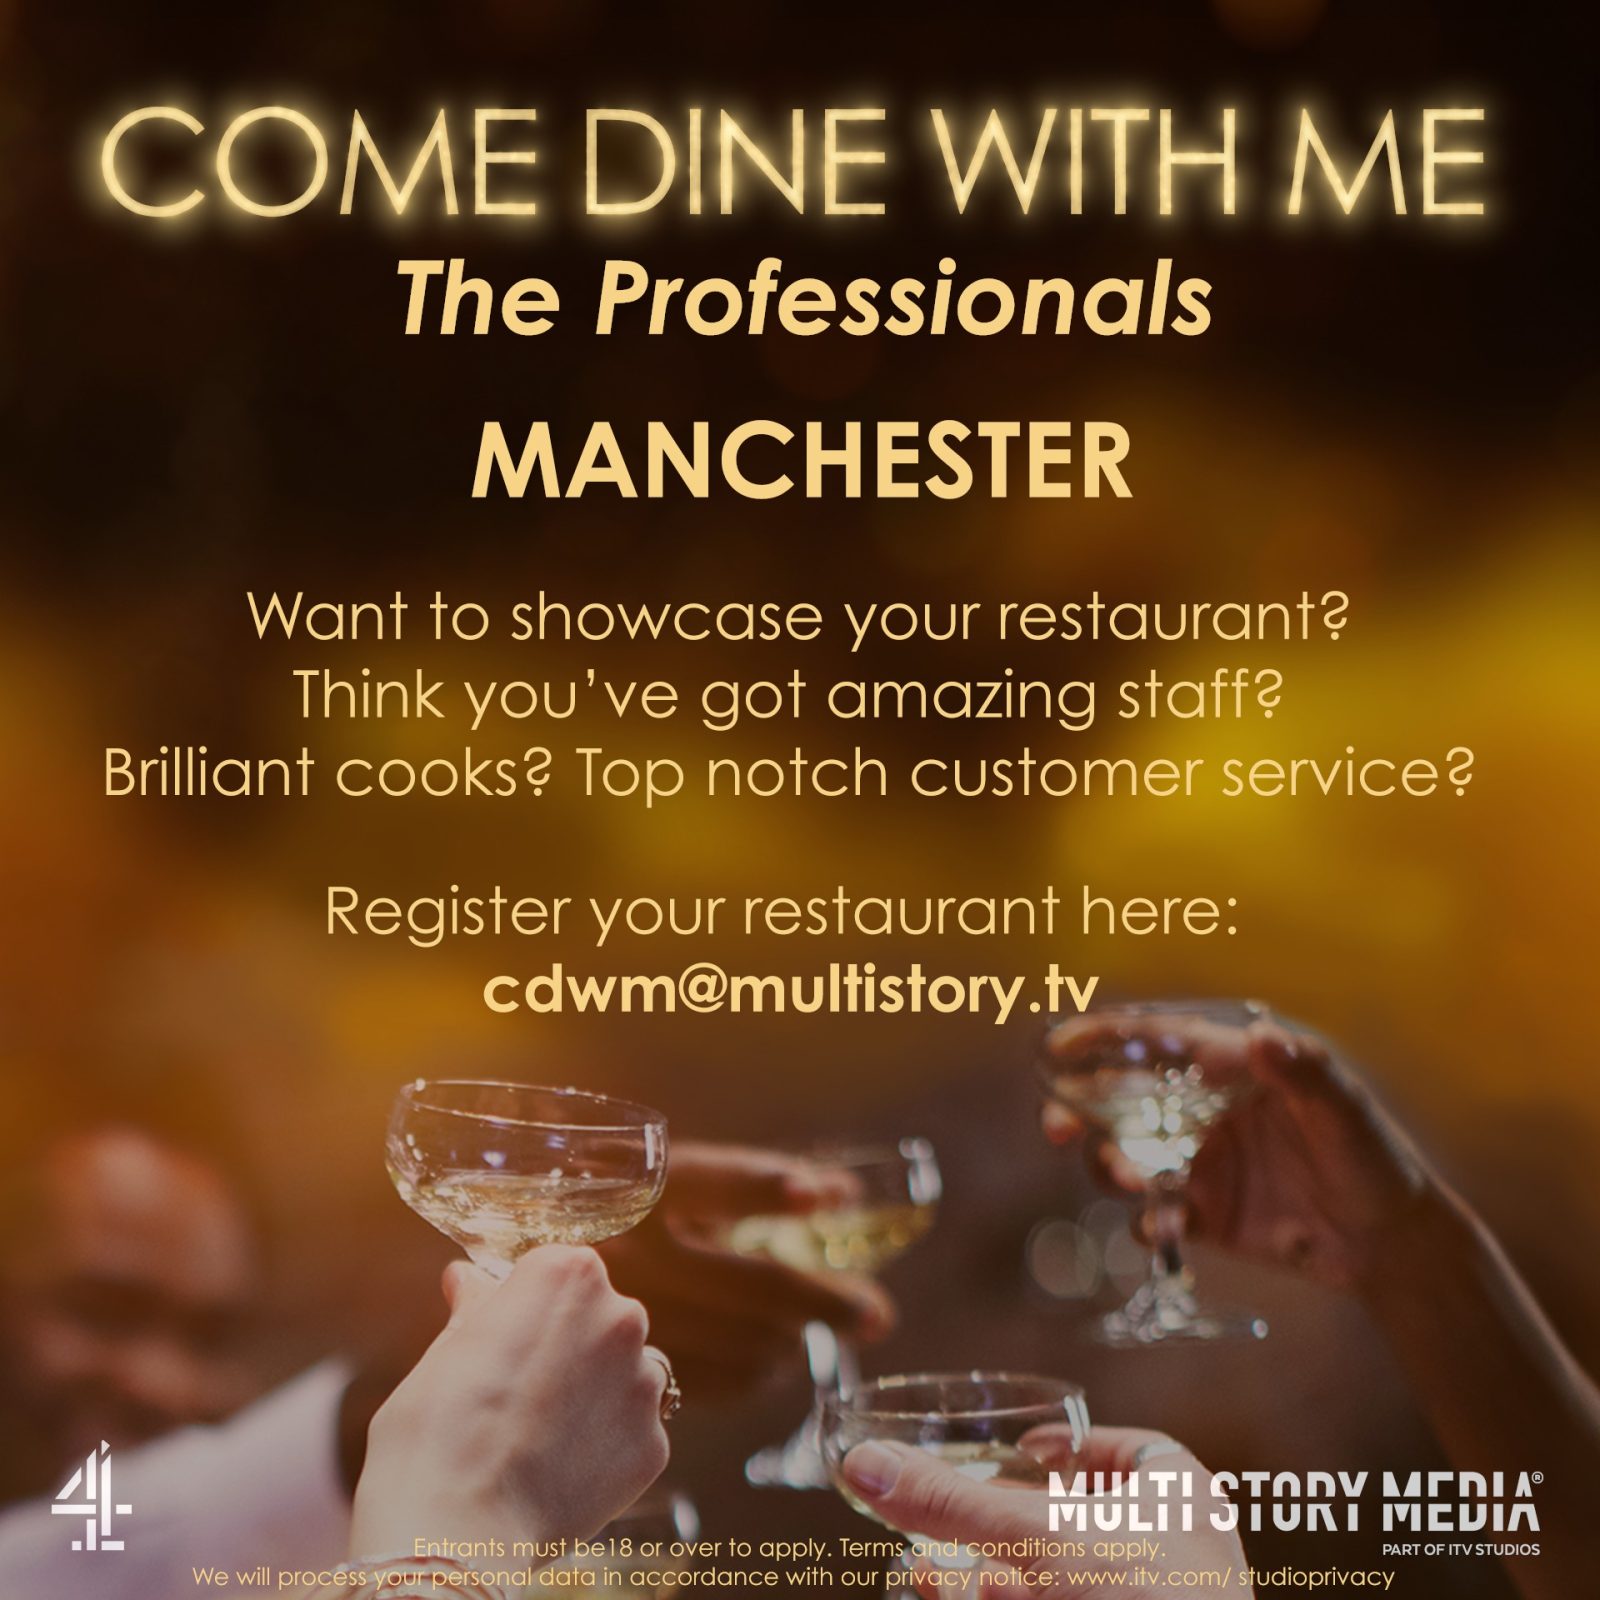 A Come Dine With Me spin-off series is looking for restaurants and chefs in Manchester, The Manc